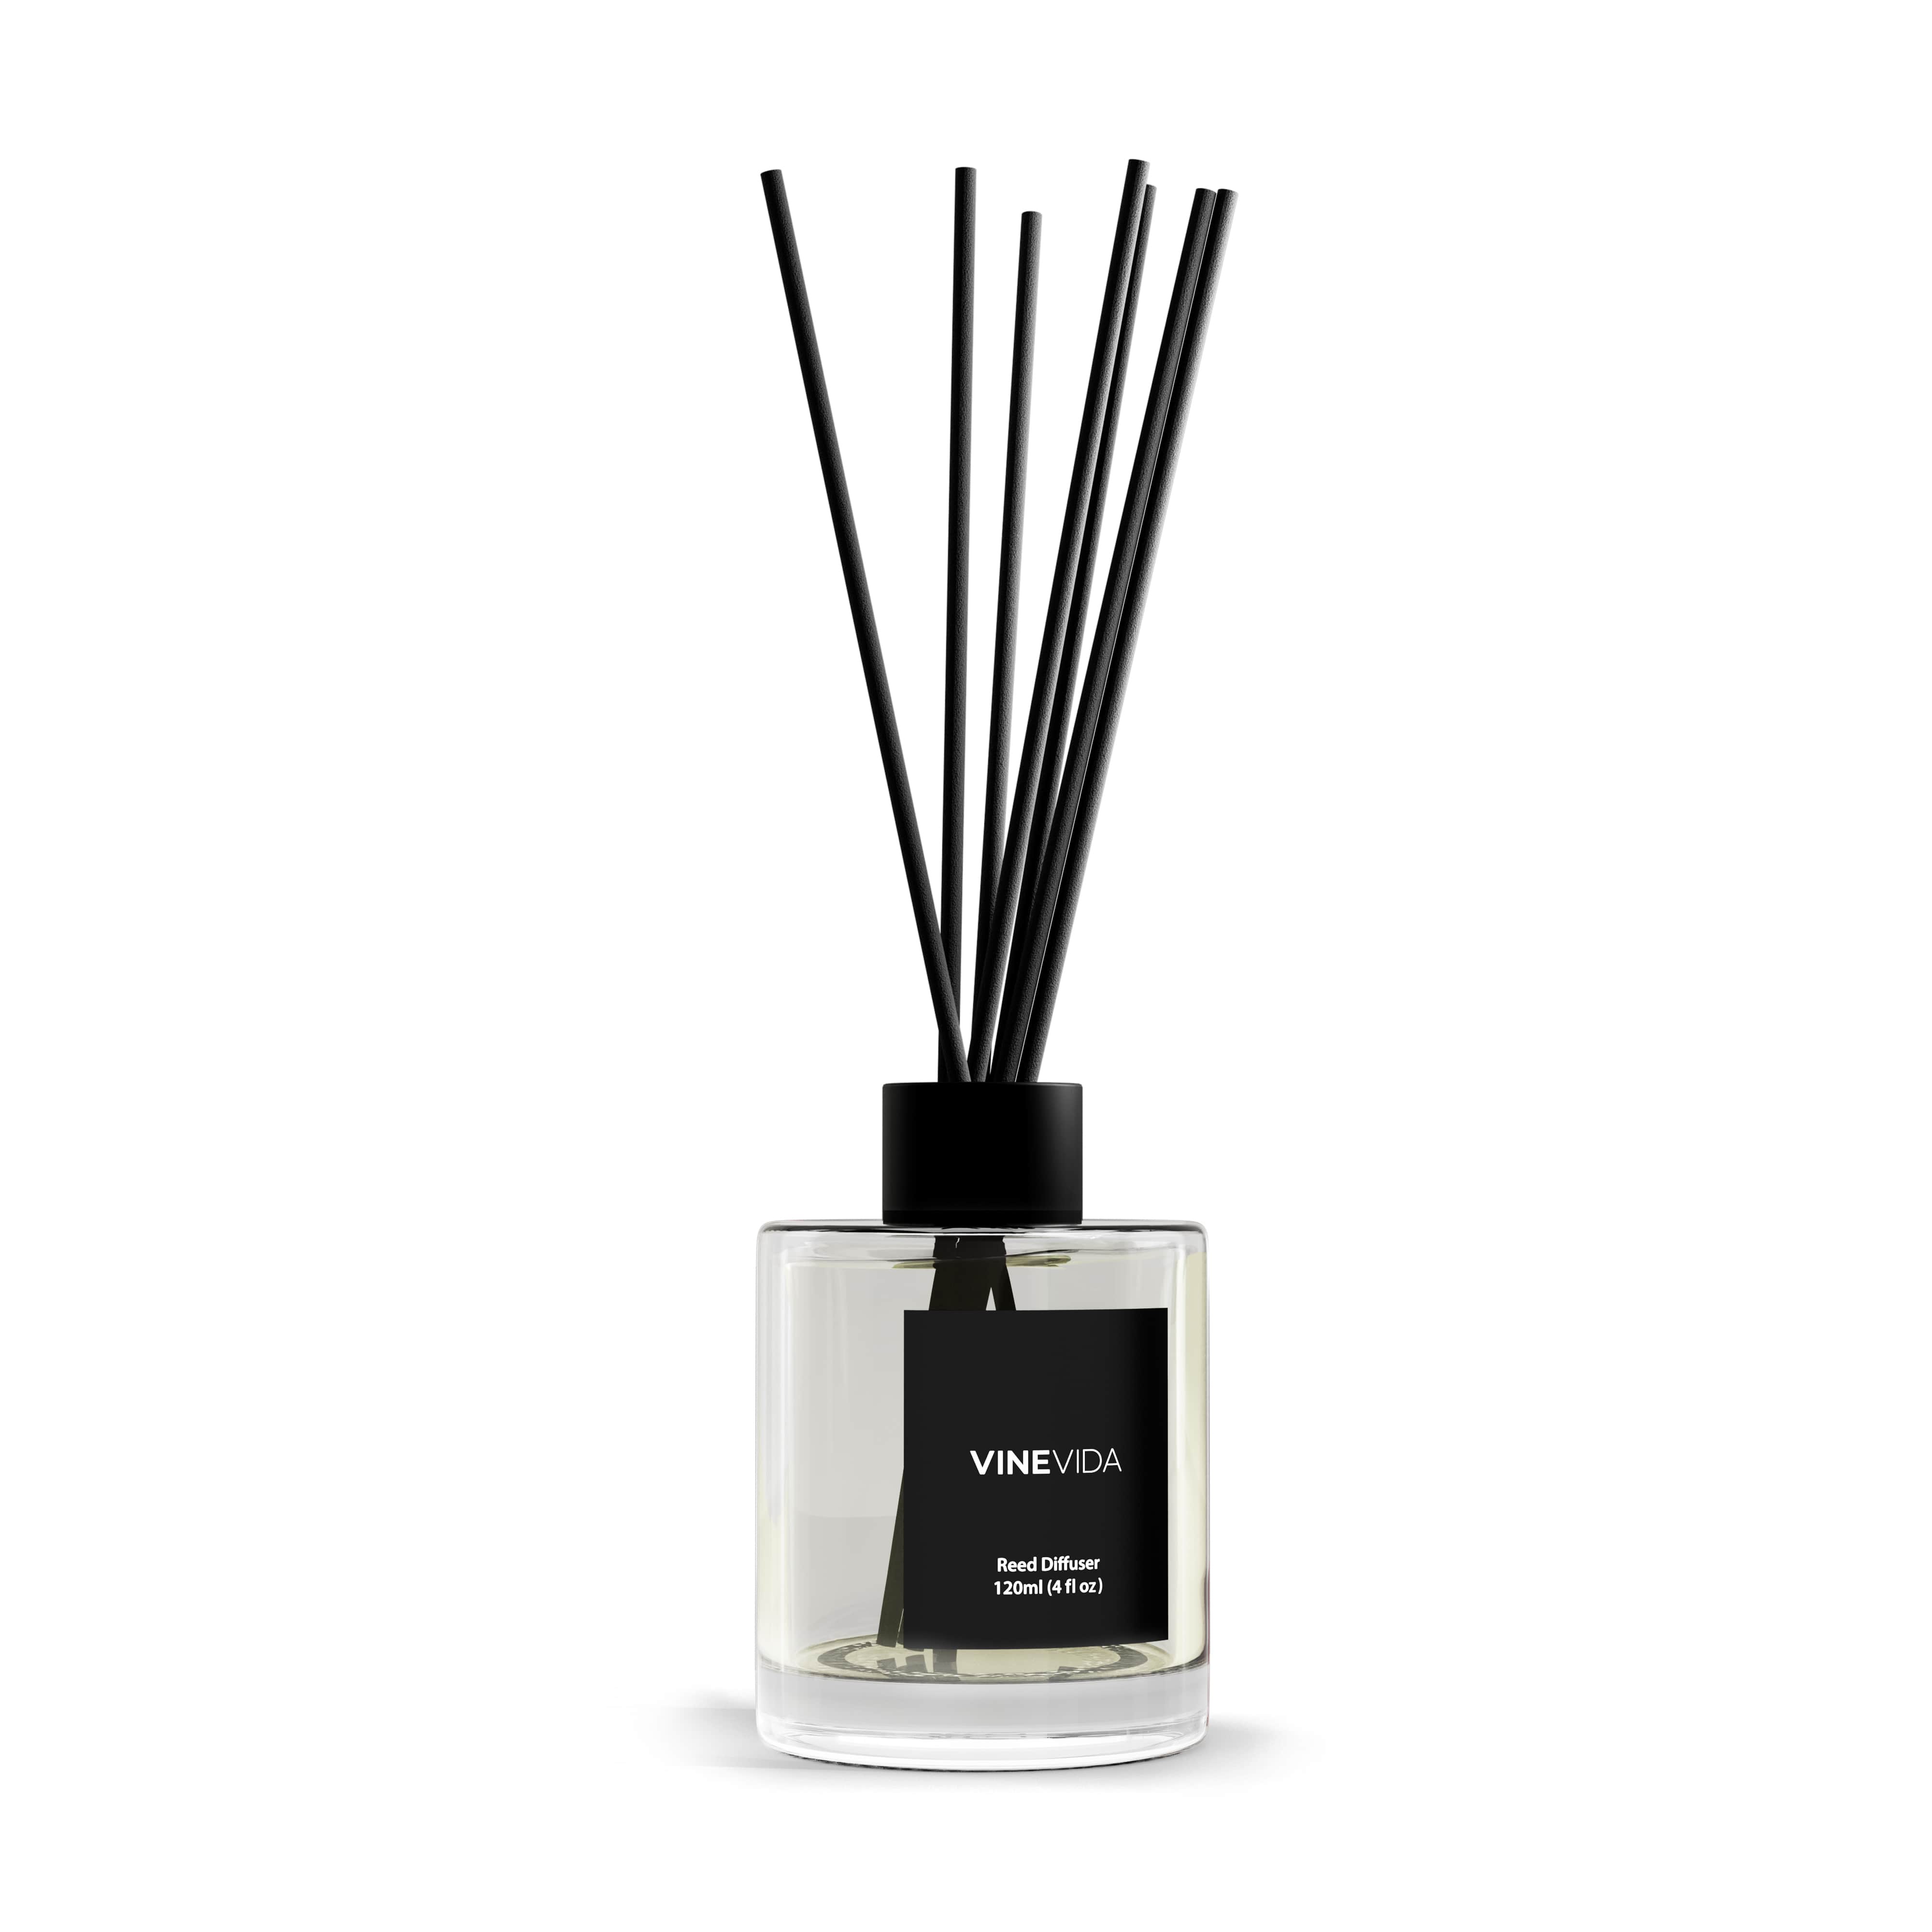 NO. 1406 Reed Diffuser - Inspired by: Midnight Fleur by Nest